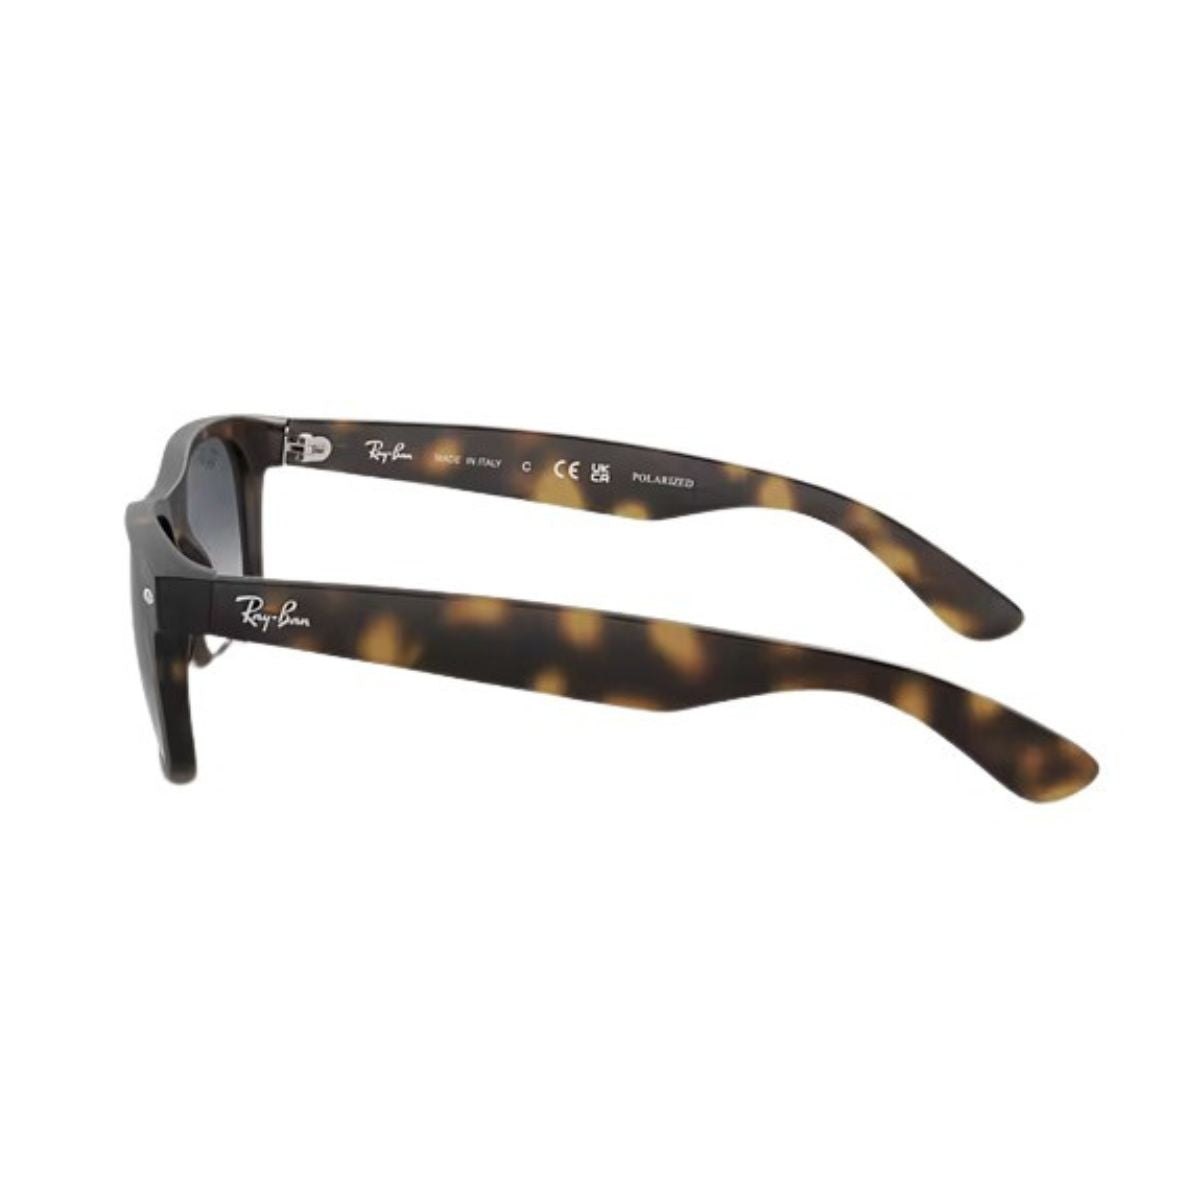 "Shop Online Ray Ban 2132 865/78 Trendy Sunglass For Men And Women At Optorium"